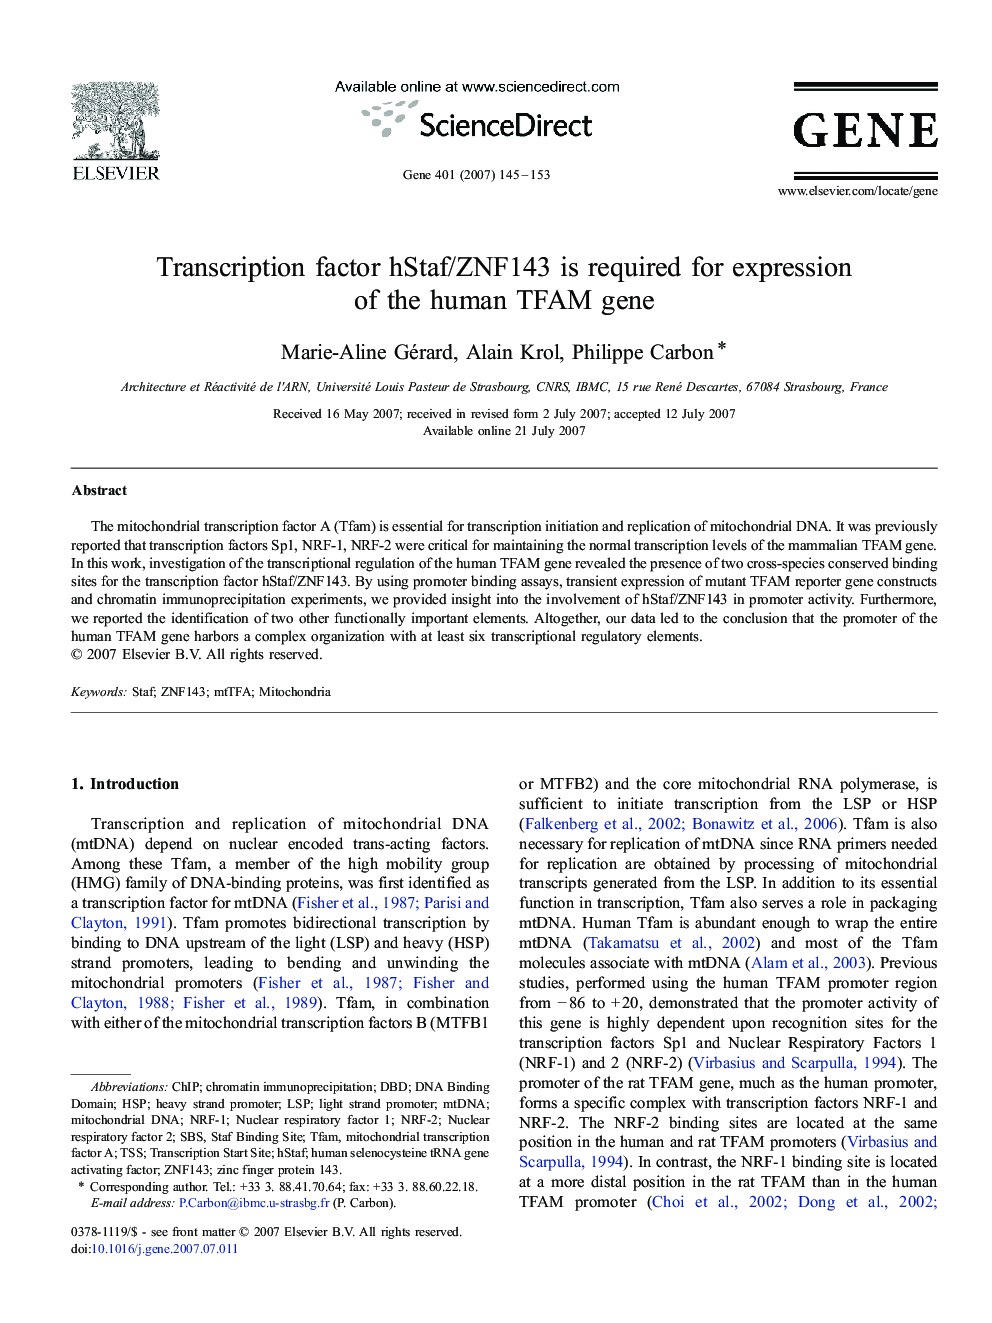 Transcription factor hStaf/ZNF143 is required for expression of the human TFAM gene